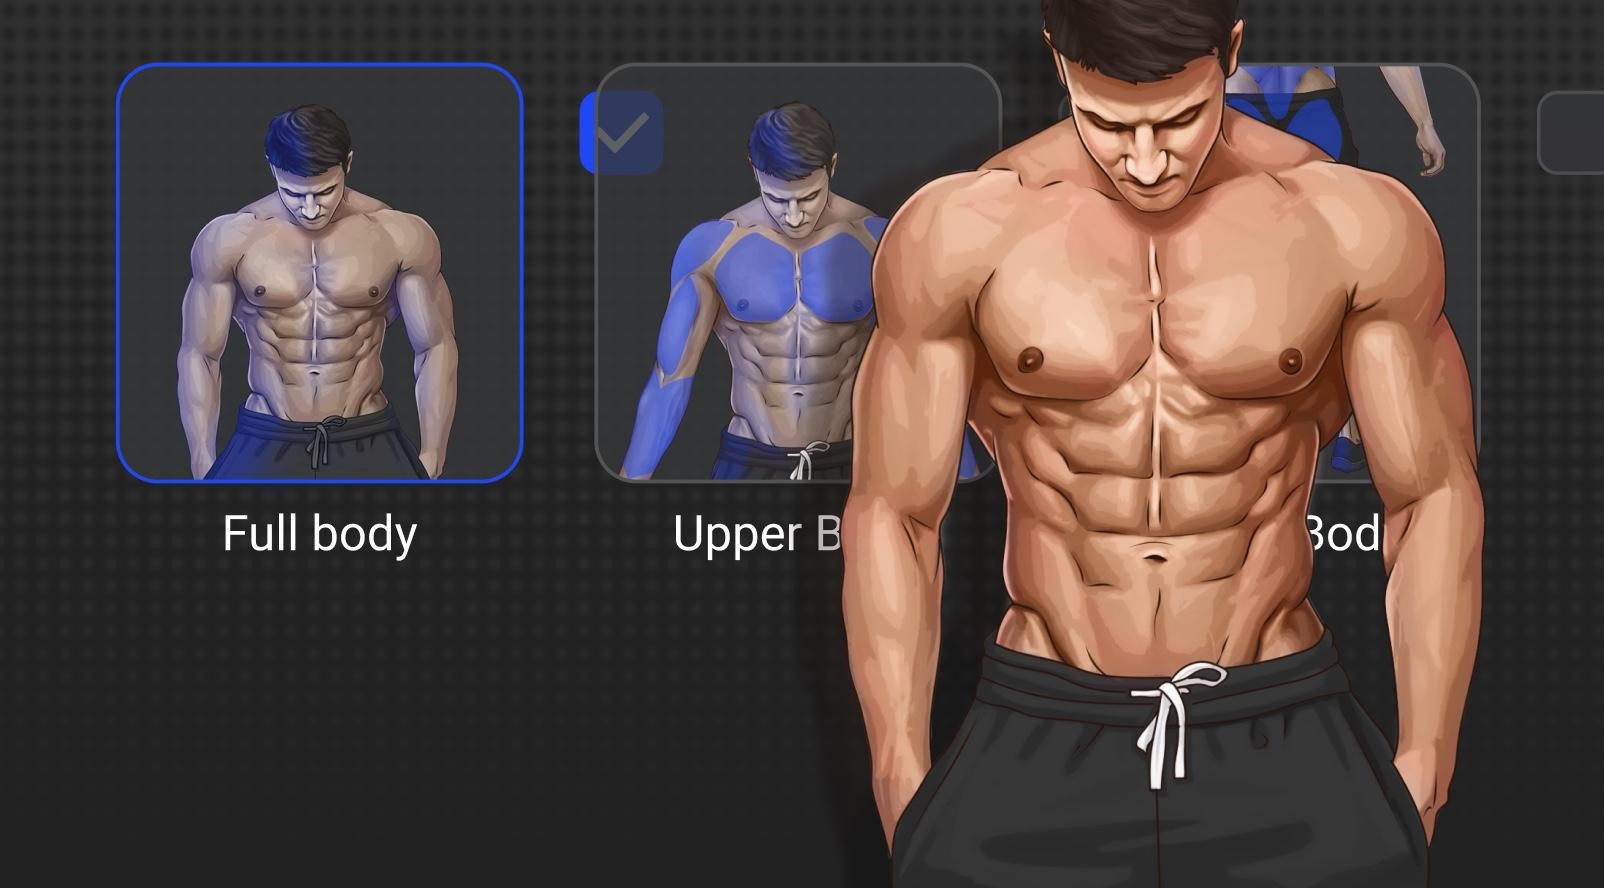 Muscle Booster: A Great Opportunity to Get Your Muscles in Shape - imei.info上的新闻图片